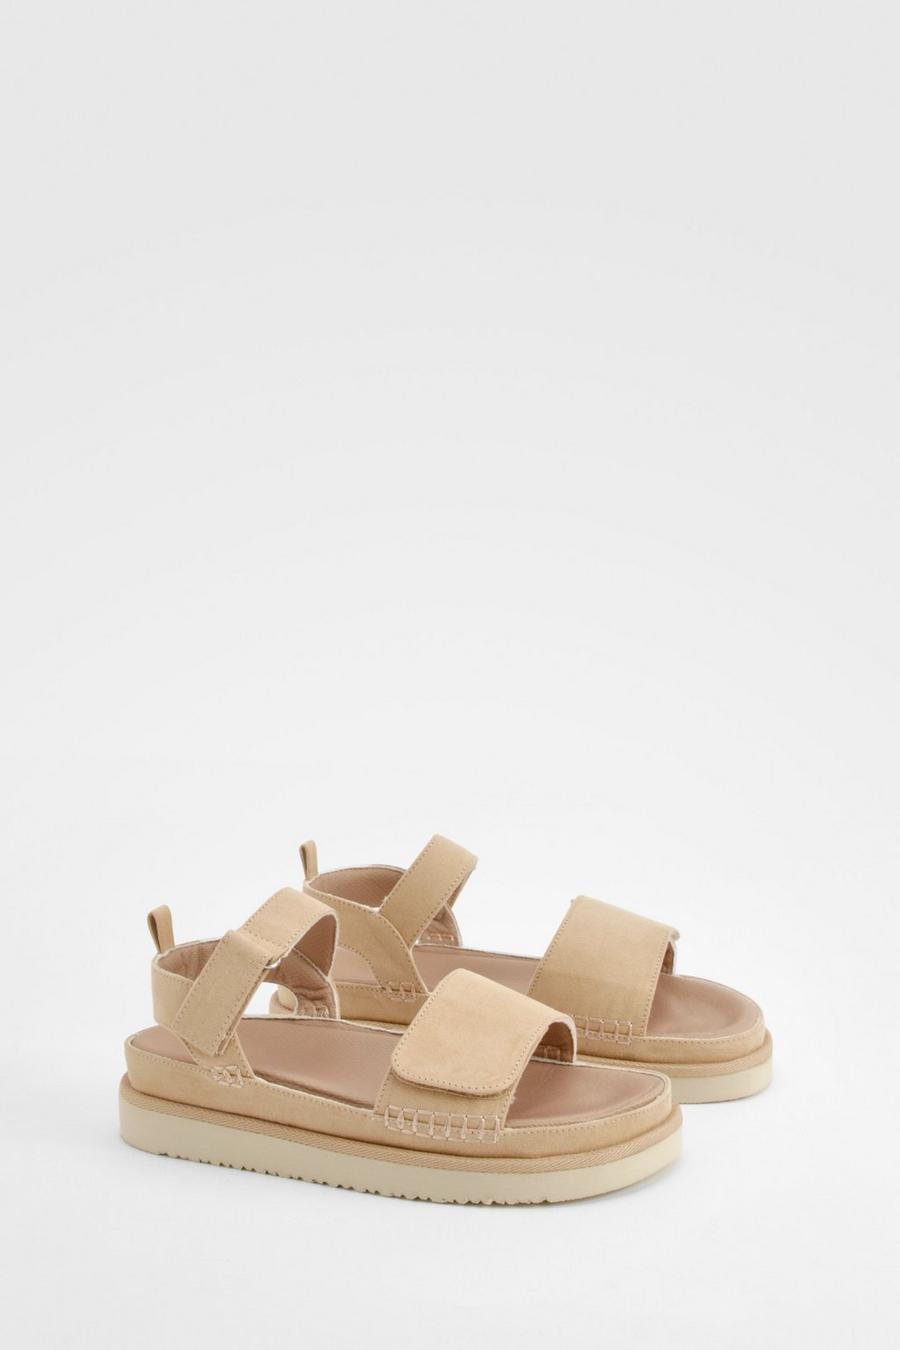 Sand Casual 2 Part Chunky Sandals image number 1